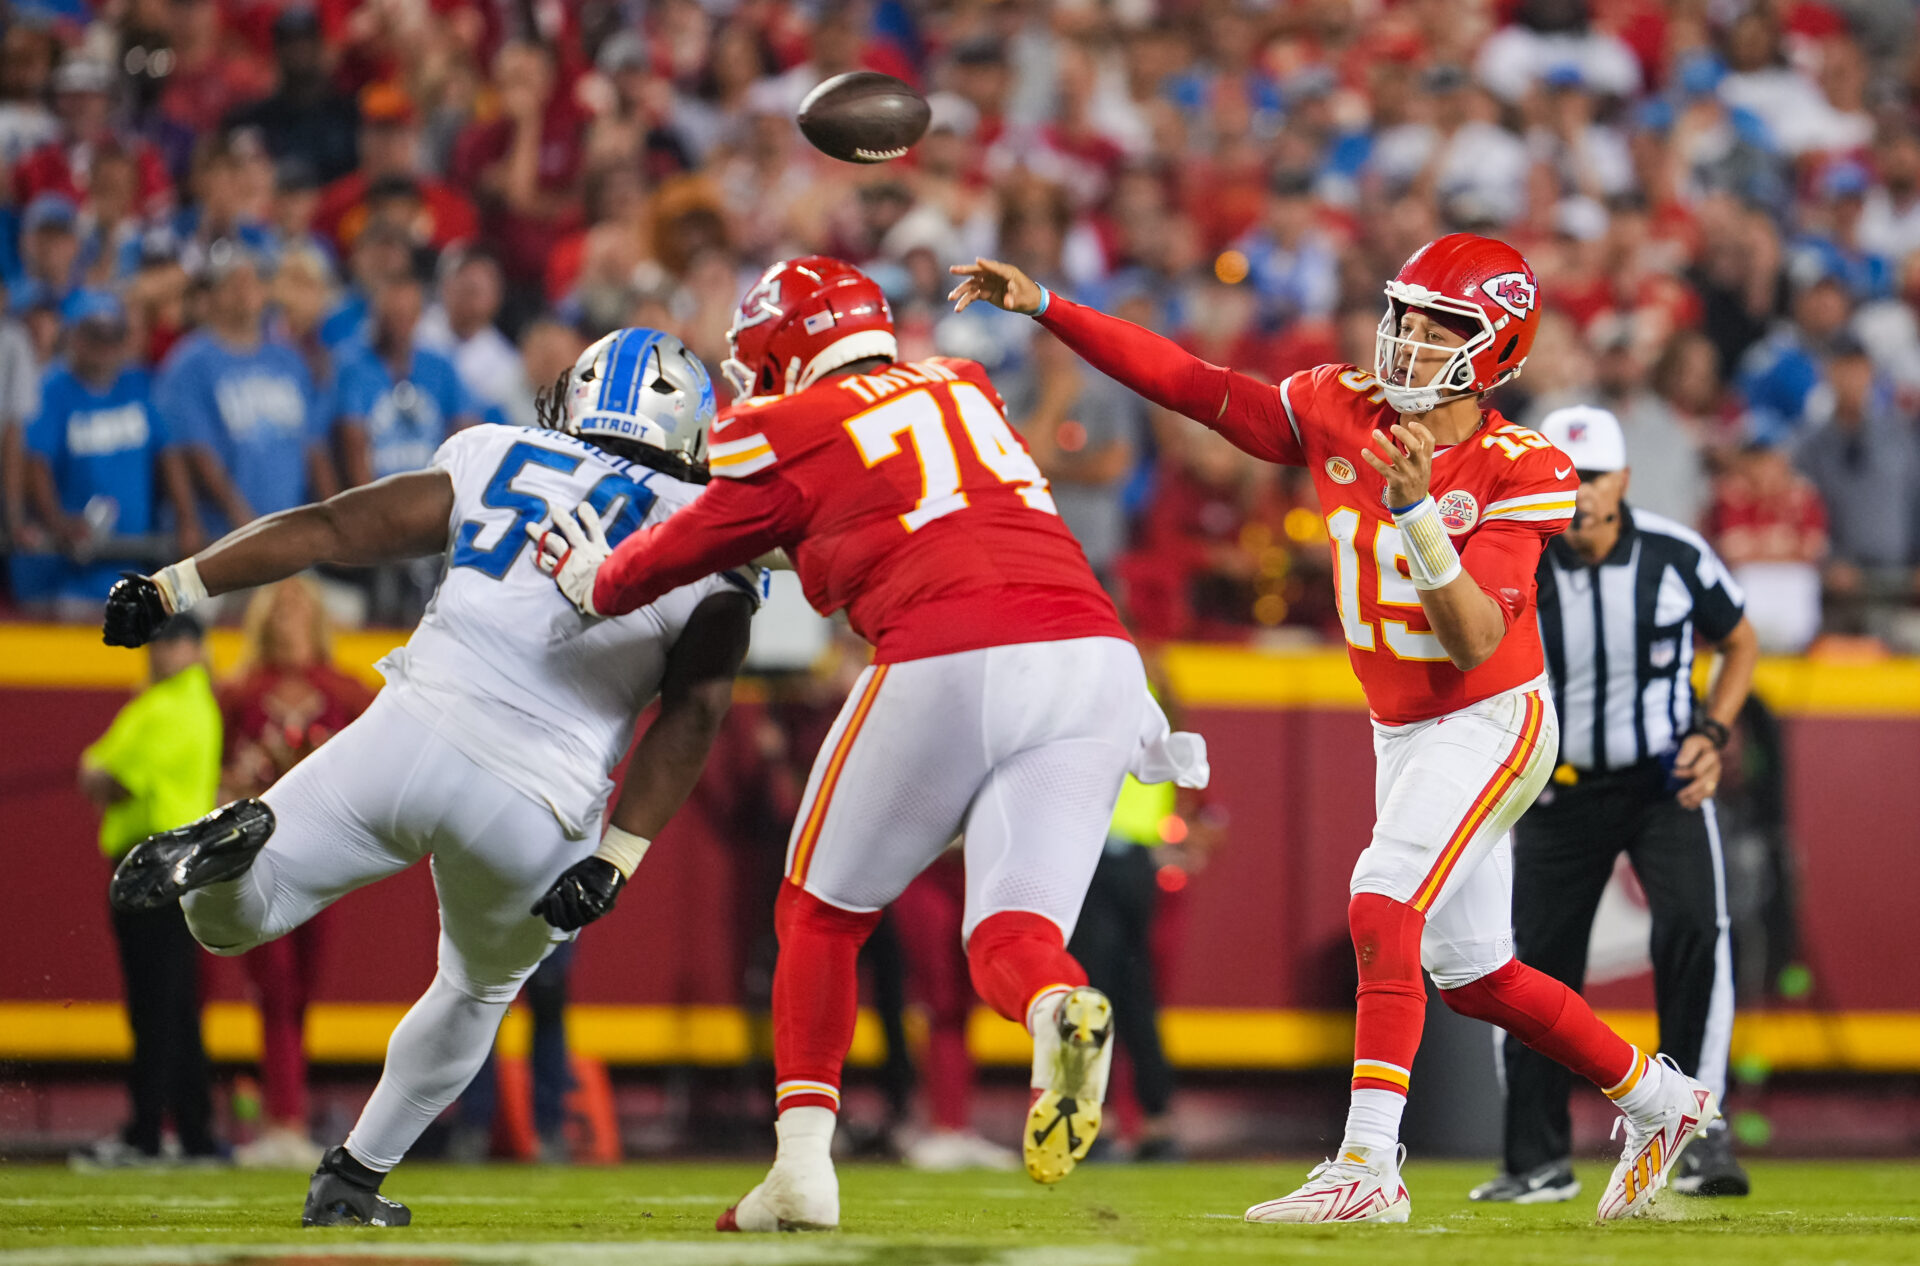 Jawaan Taylor blocks a Detroit Lion who is heading for Patrick Mahomes, who is throwing the ball